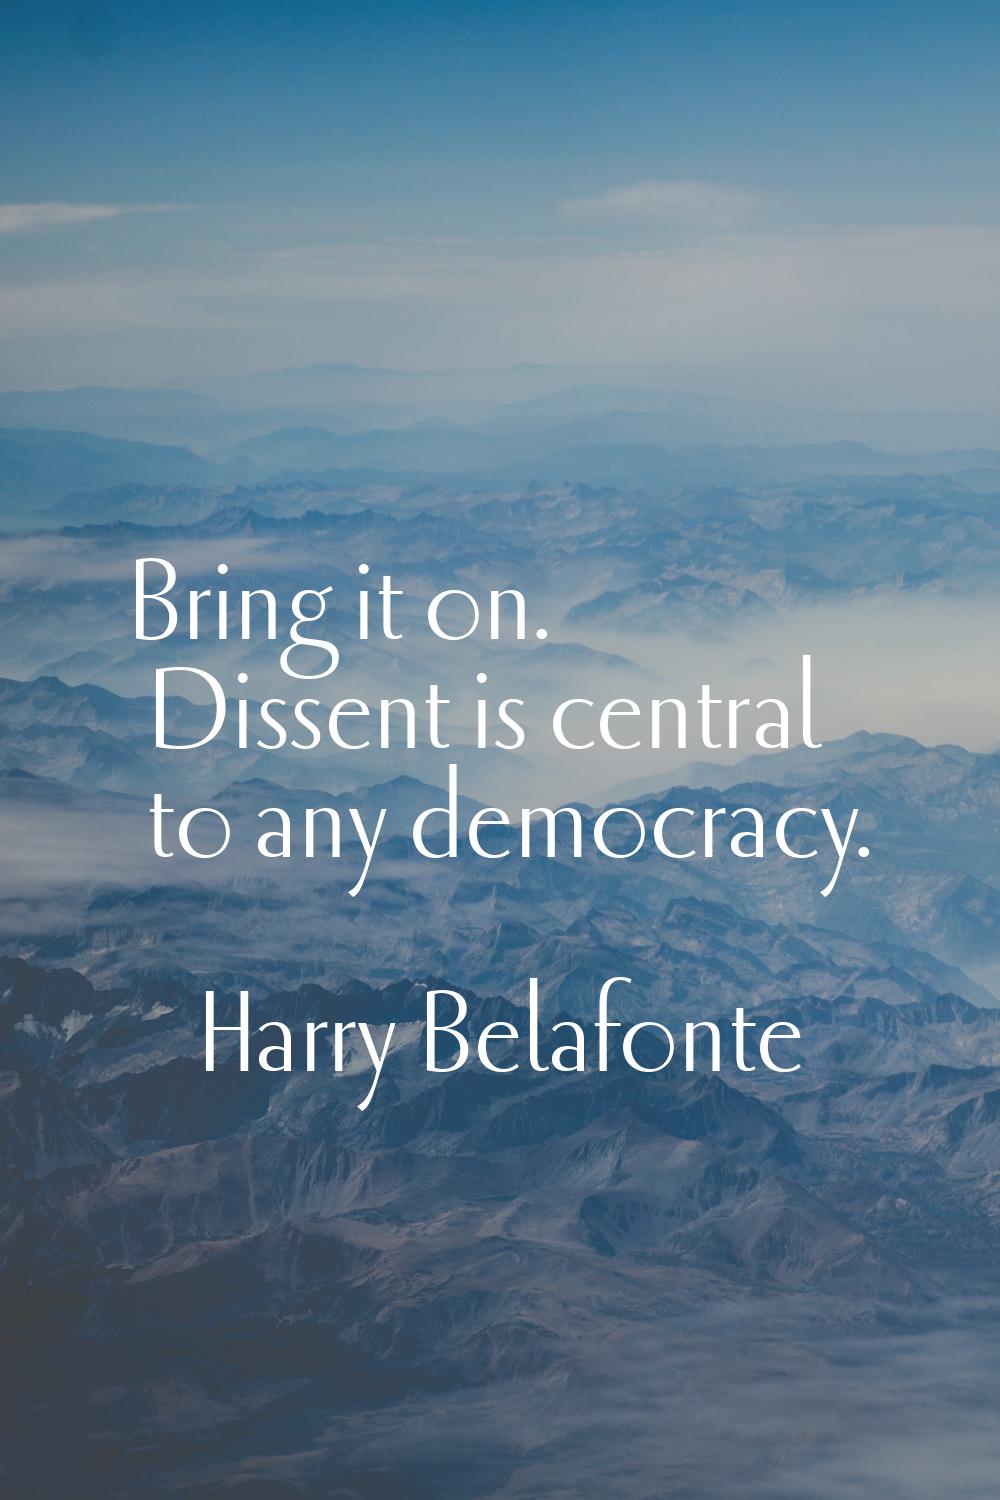 Bring it on. Dissent is central to any democracy.